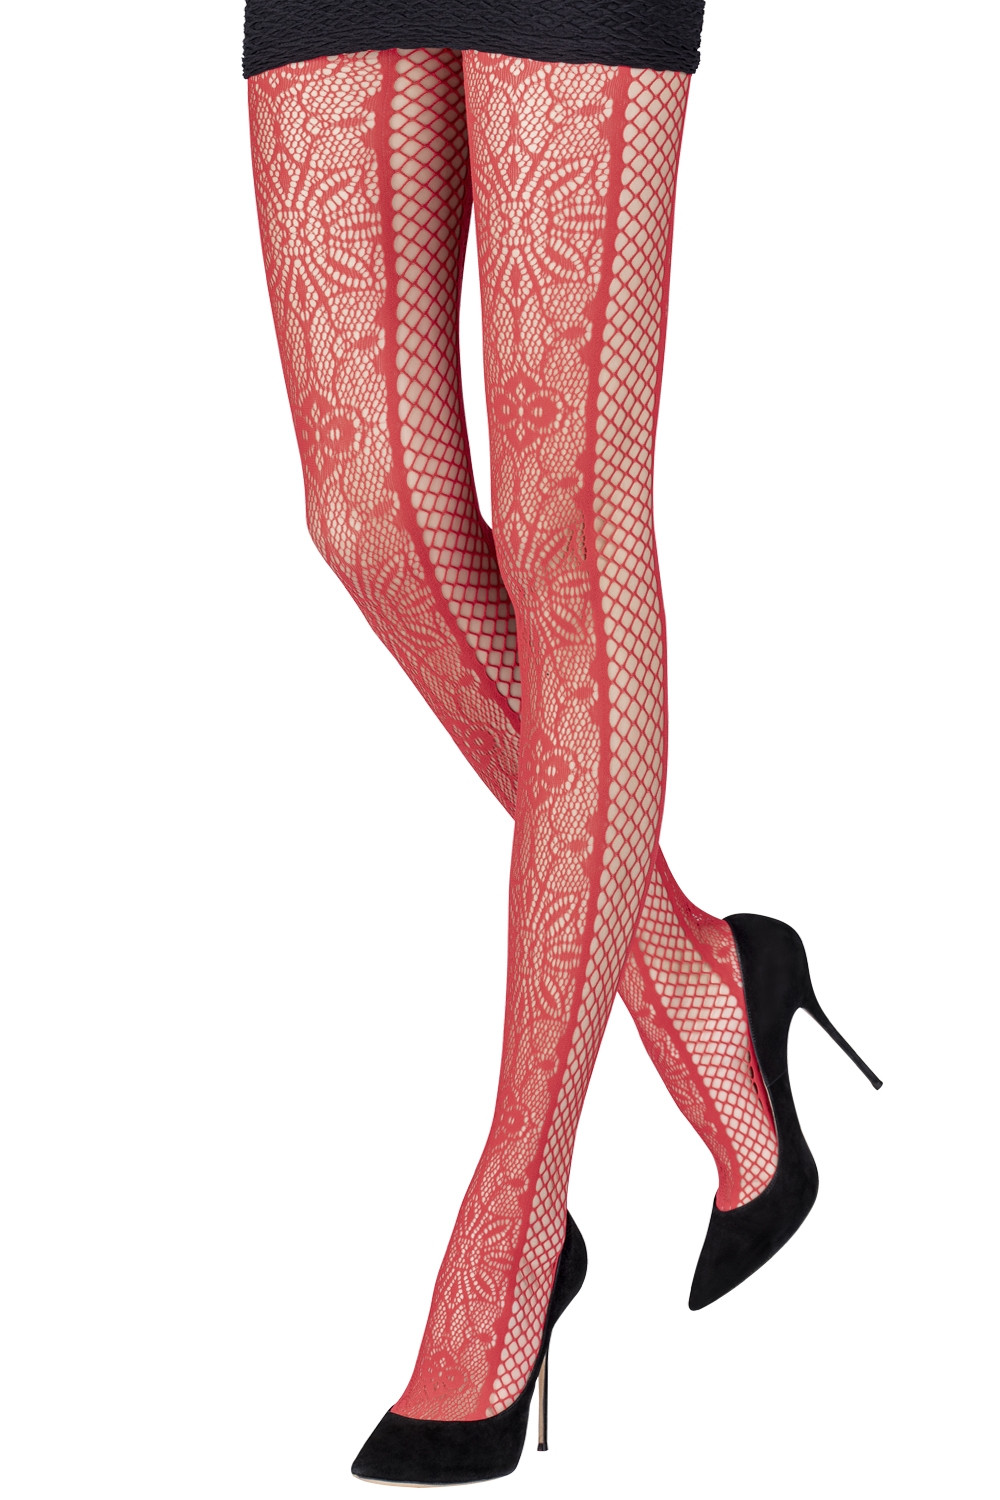 Emilio Cavallini,Emilio Cavallini Emillio Cavallini Graphic Lace